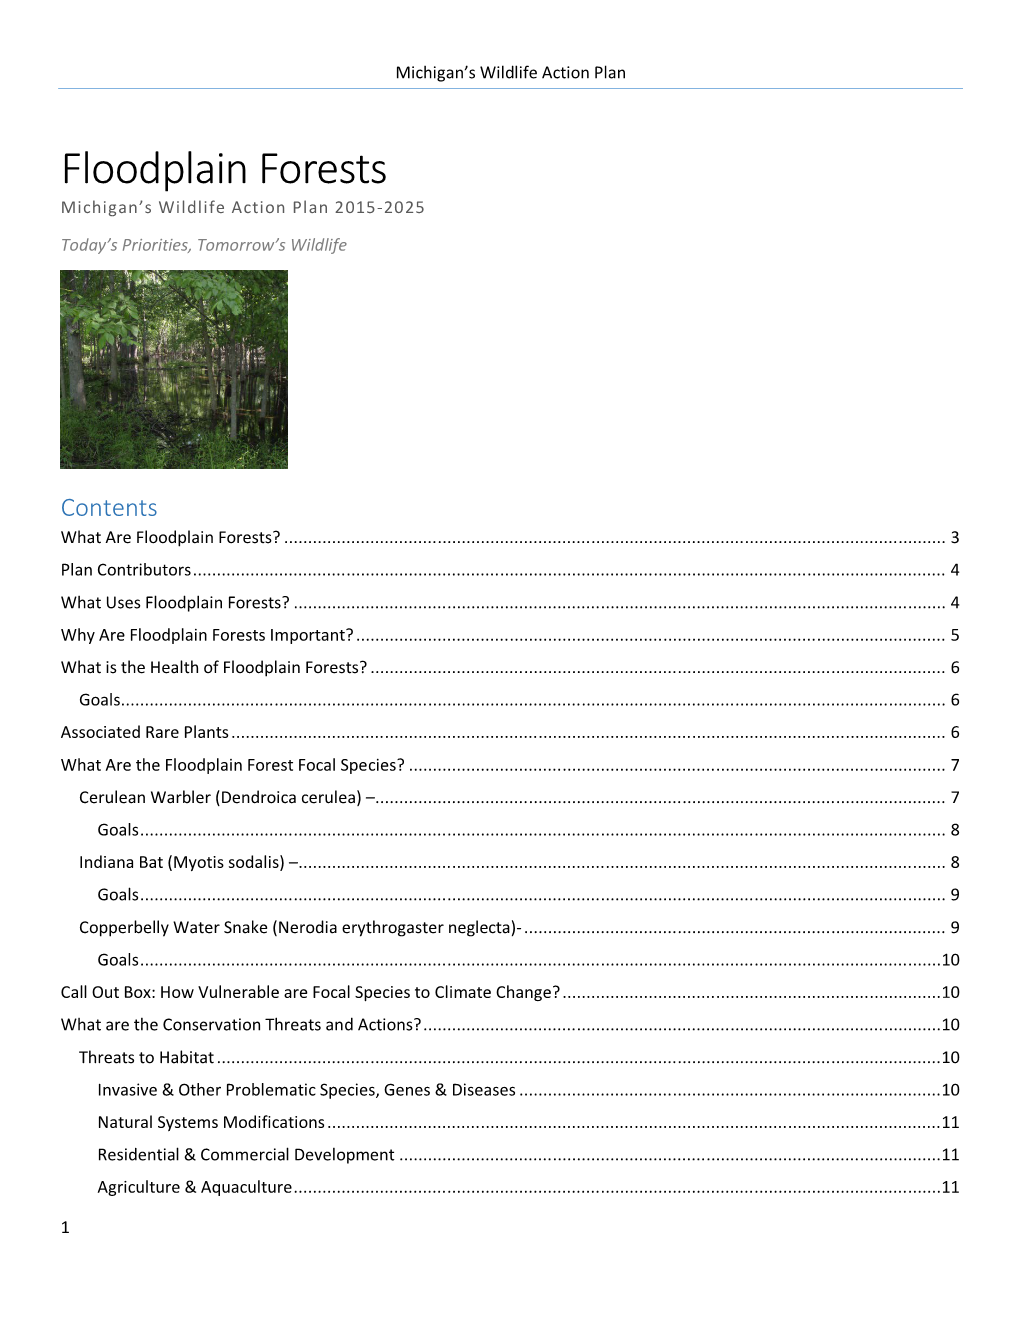 Wildlife Action Plan: Floodplain Forests (Accessible)